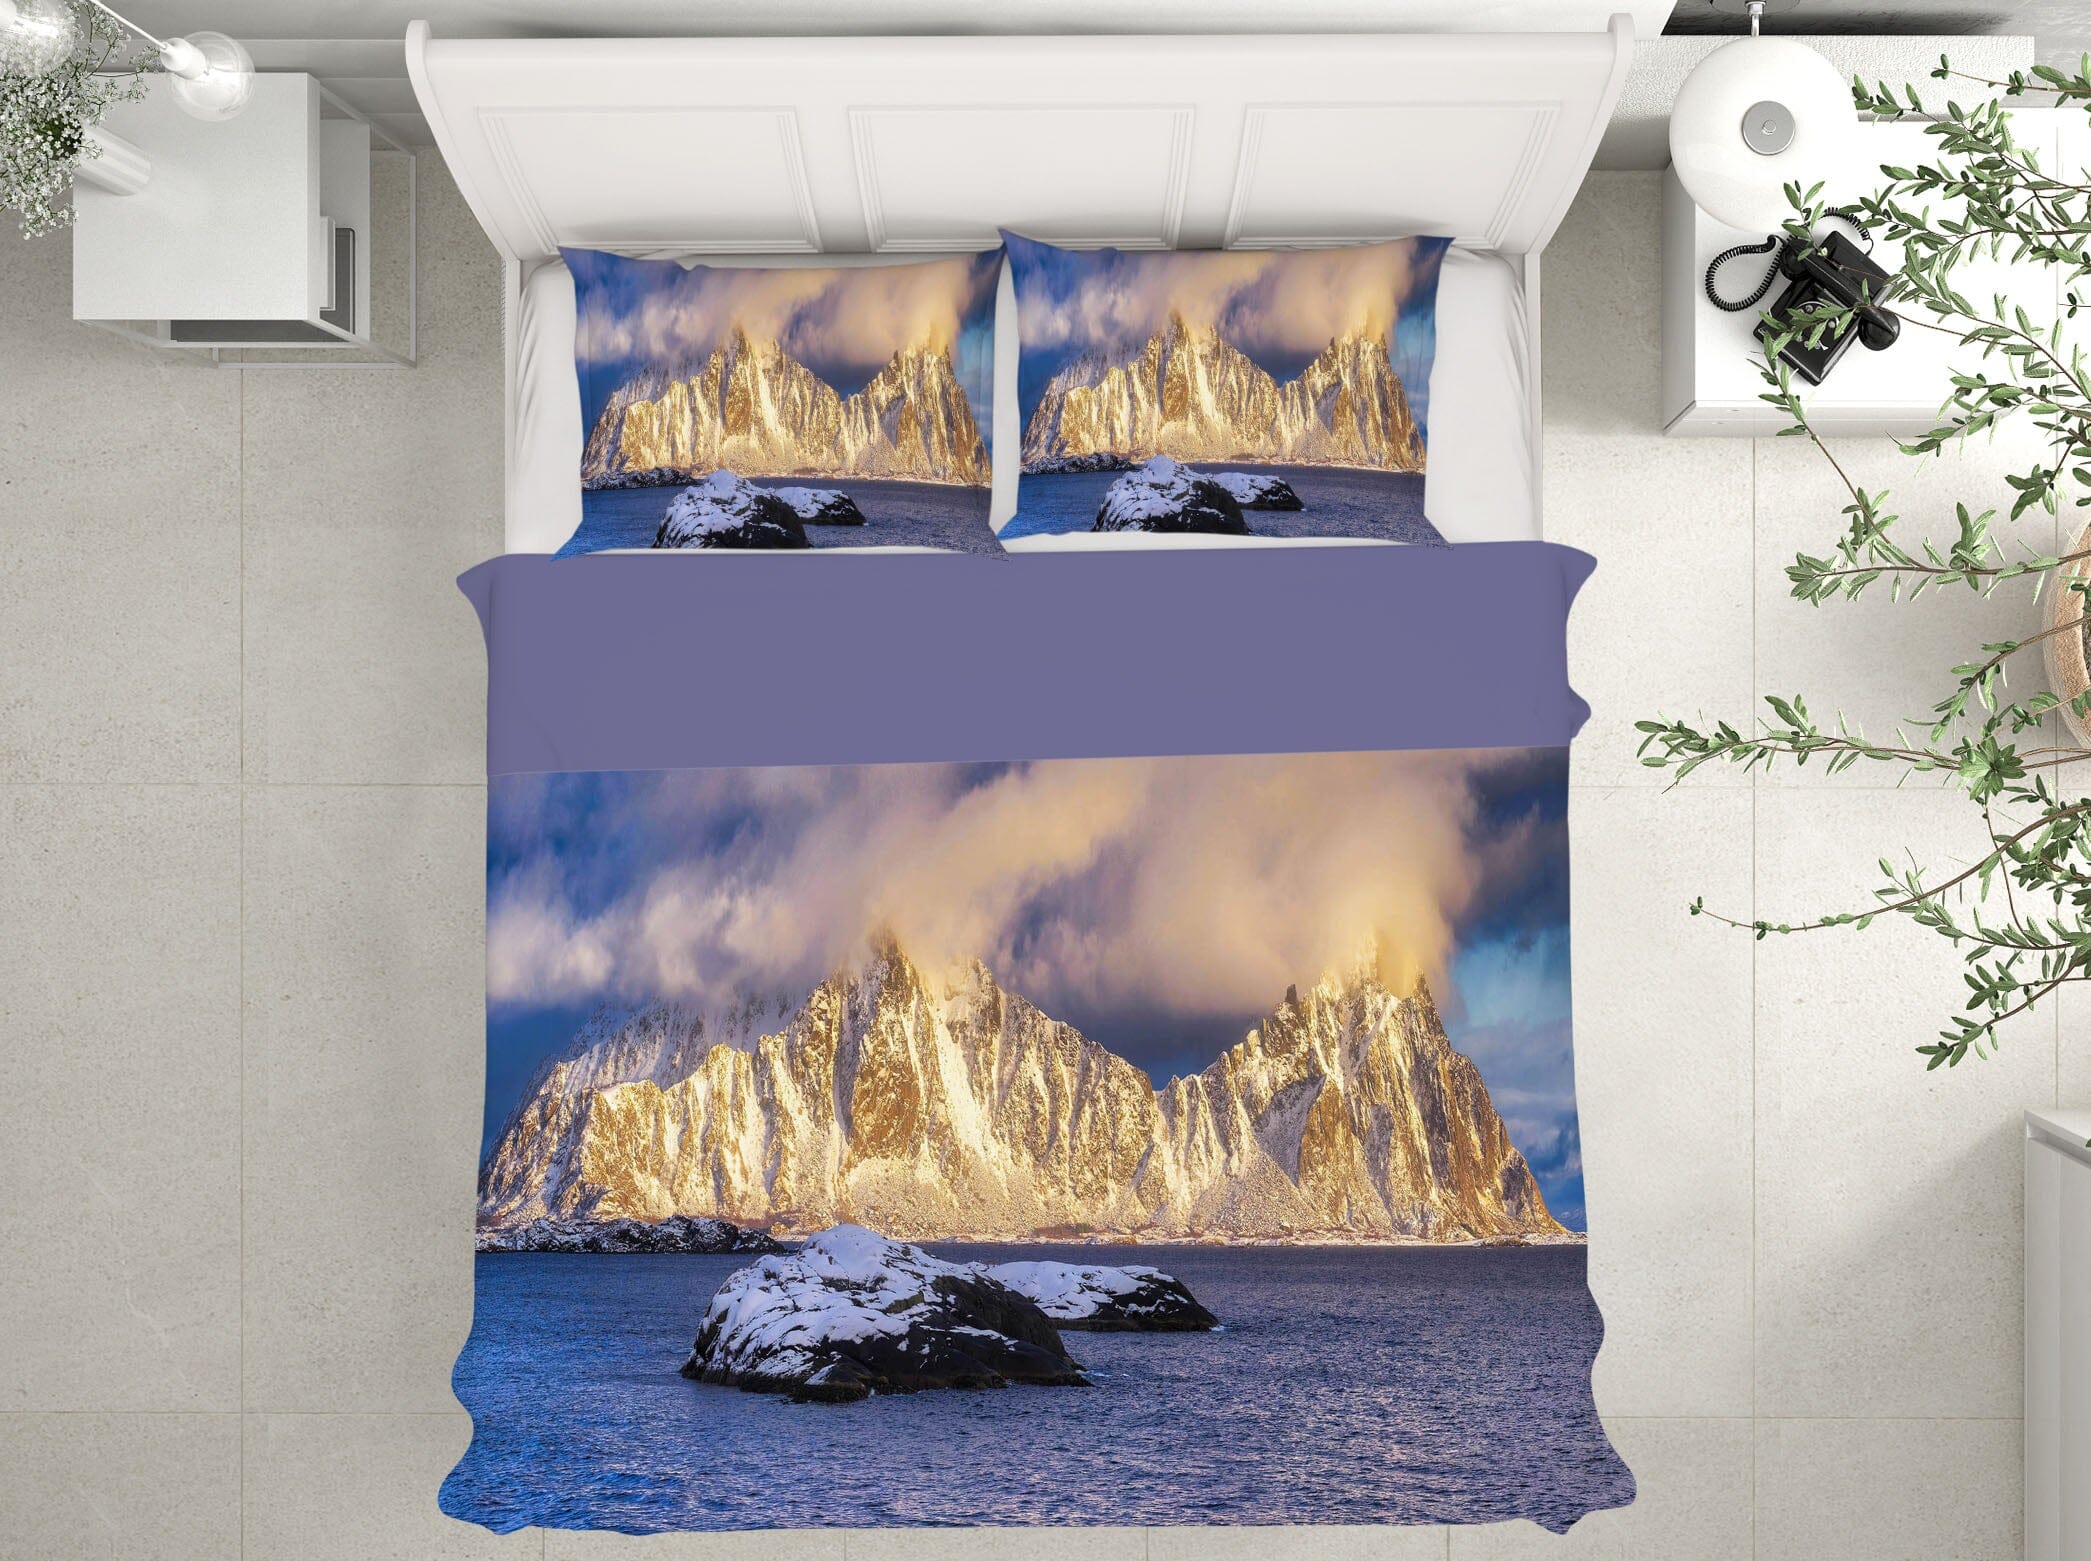 3D Volcanic Eruptions 2152 Marco Carmassi Bedding Bed Pillowcases Quilt Quiet Covers AJ Creativity Home 